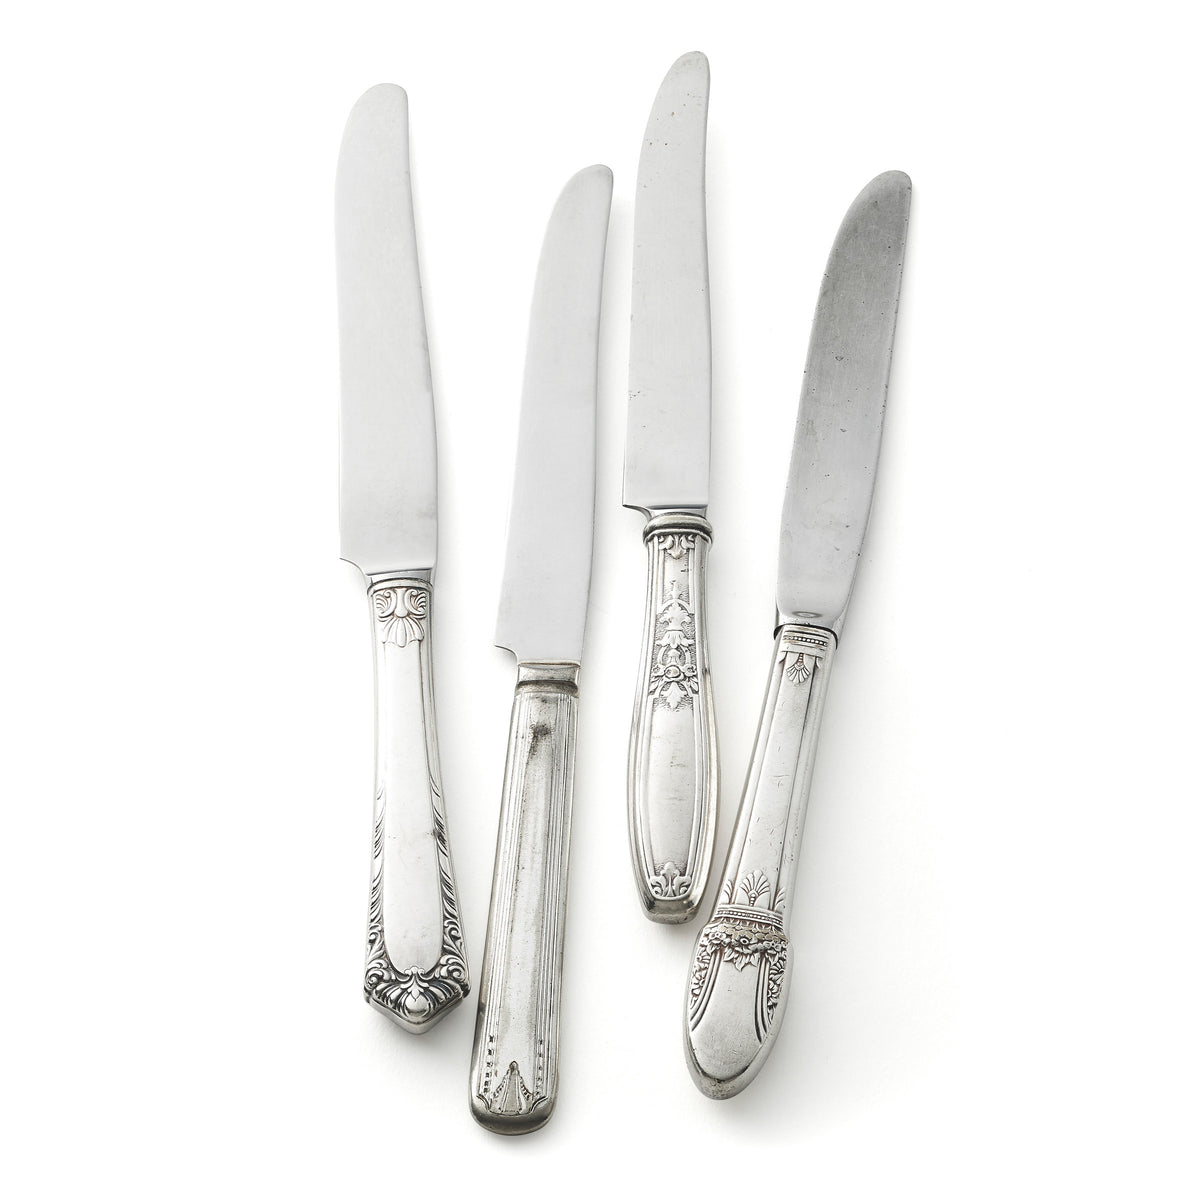 Vintage, silver-plated dinner knives, collected by Caskata.